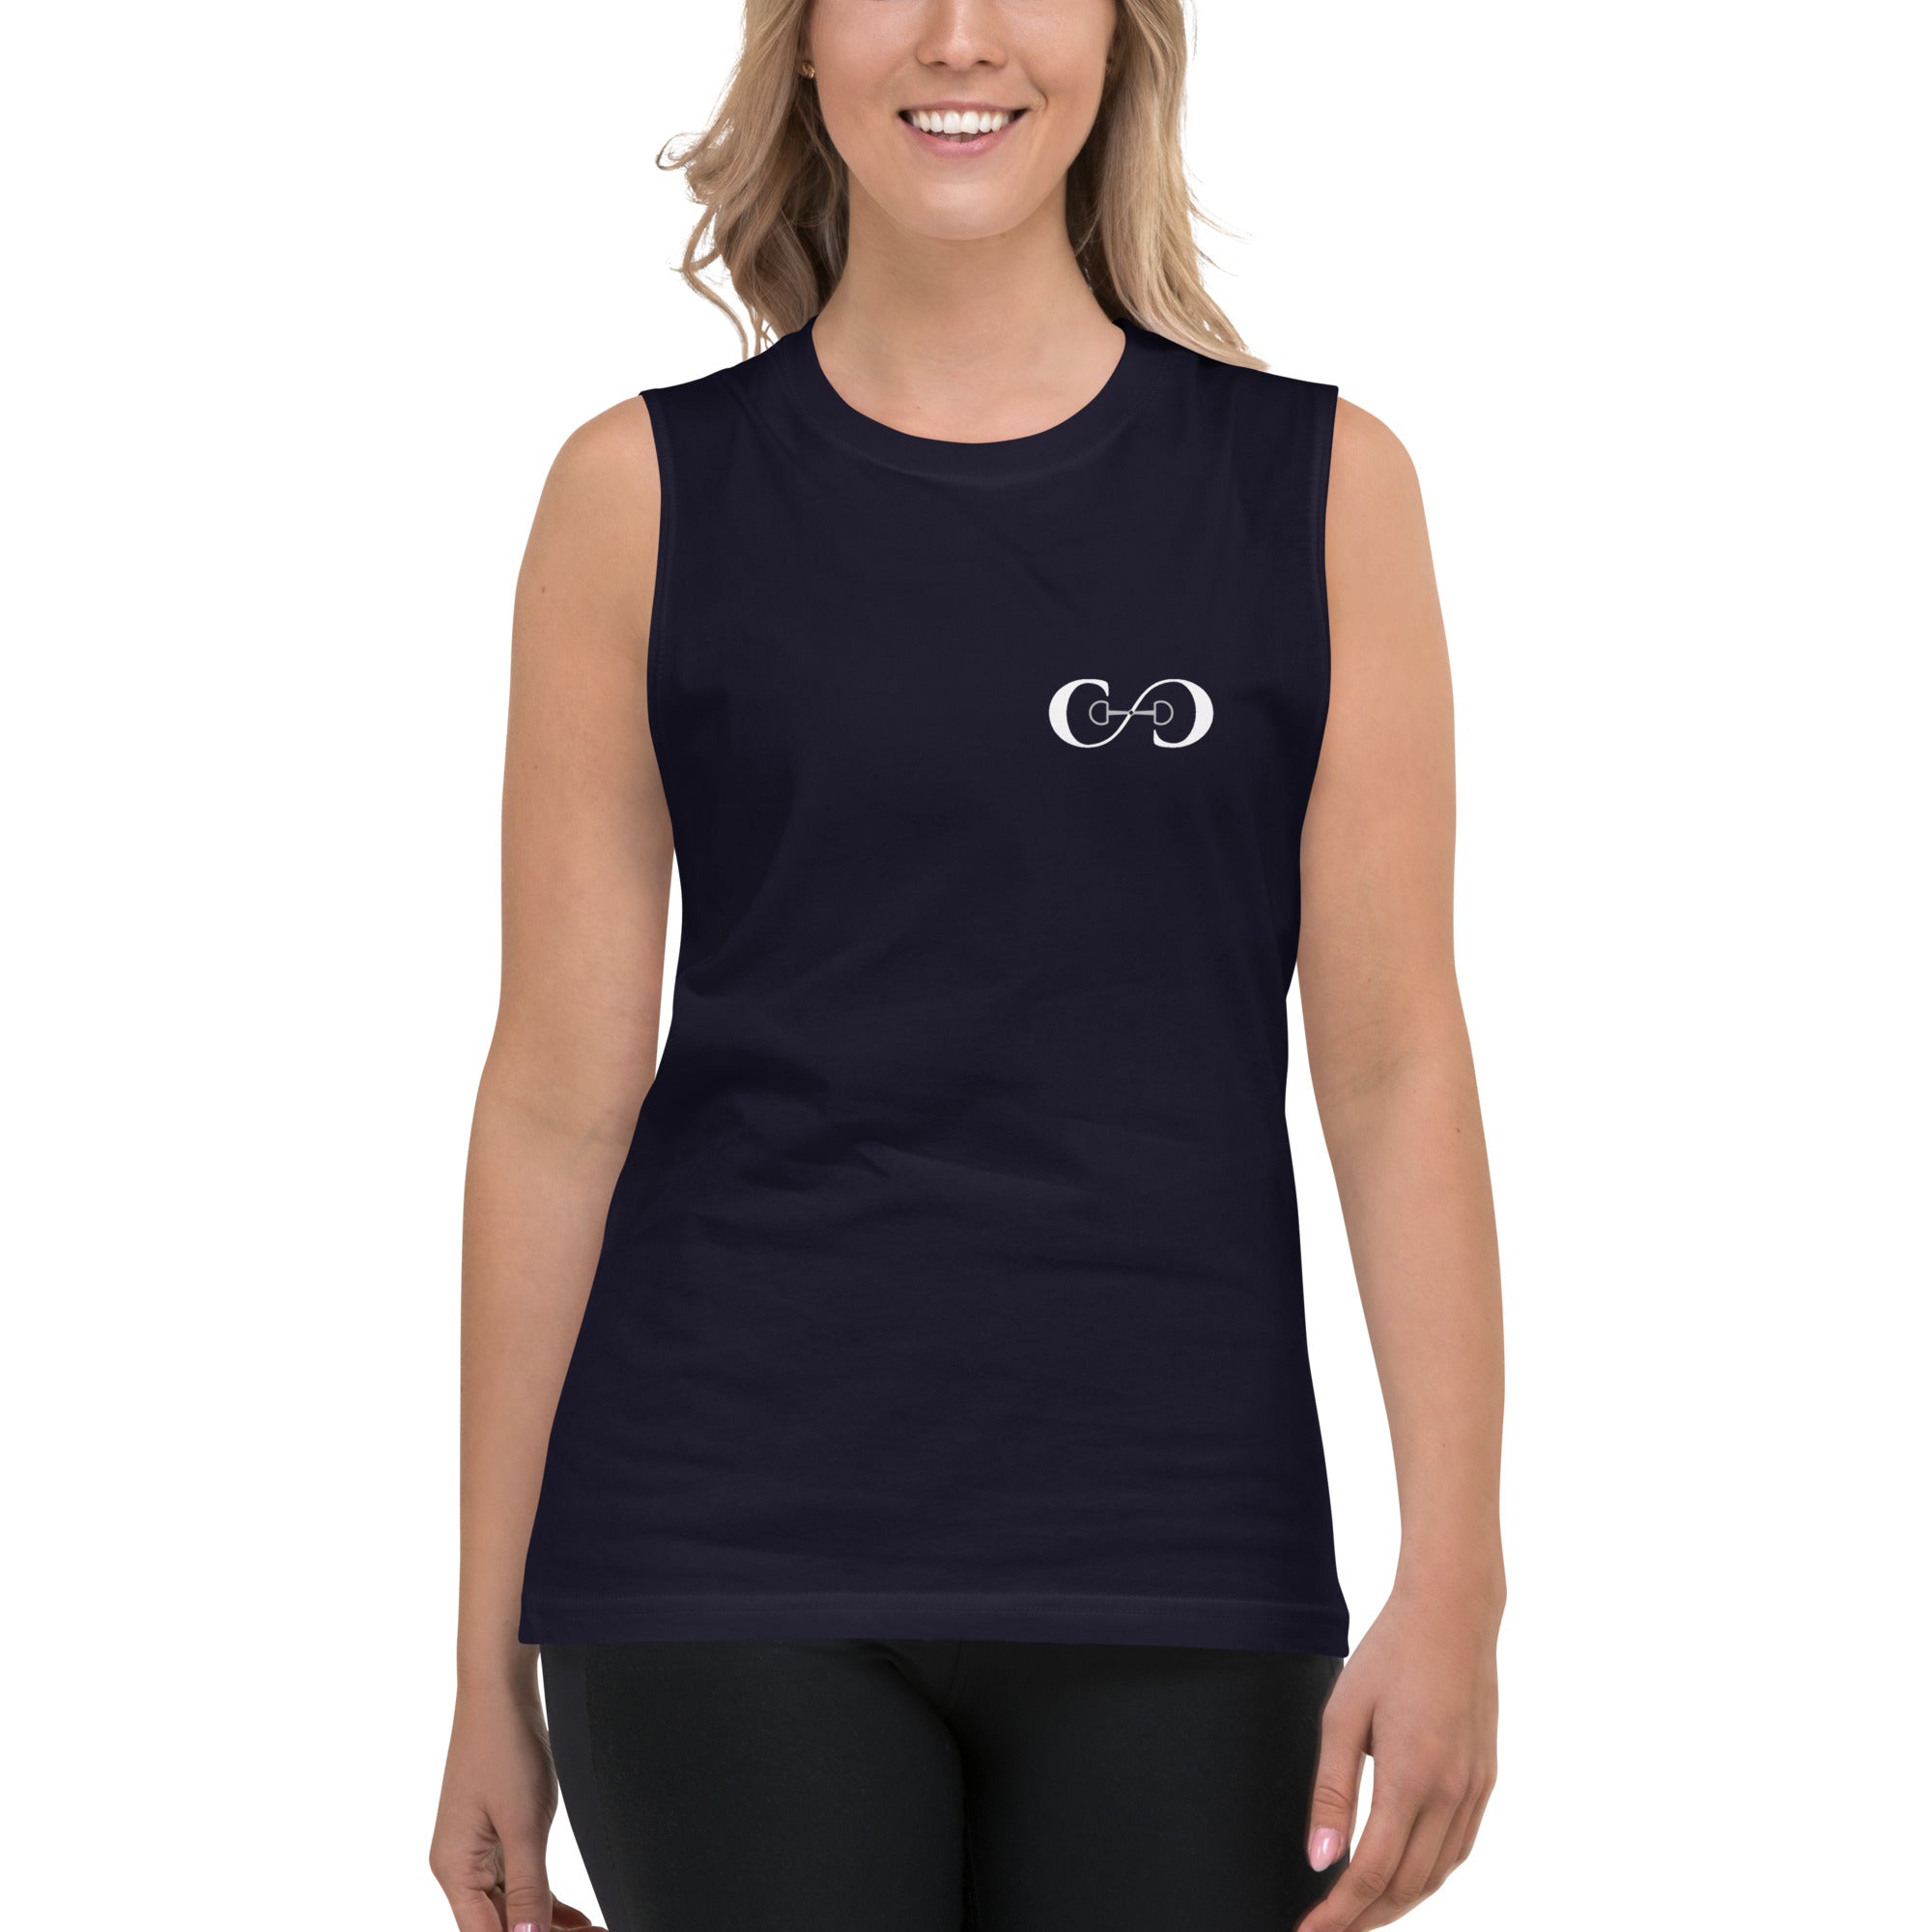 Every{Body} Muscle Tank